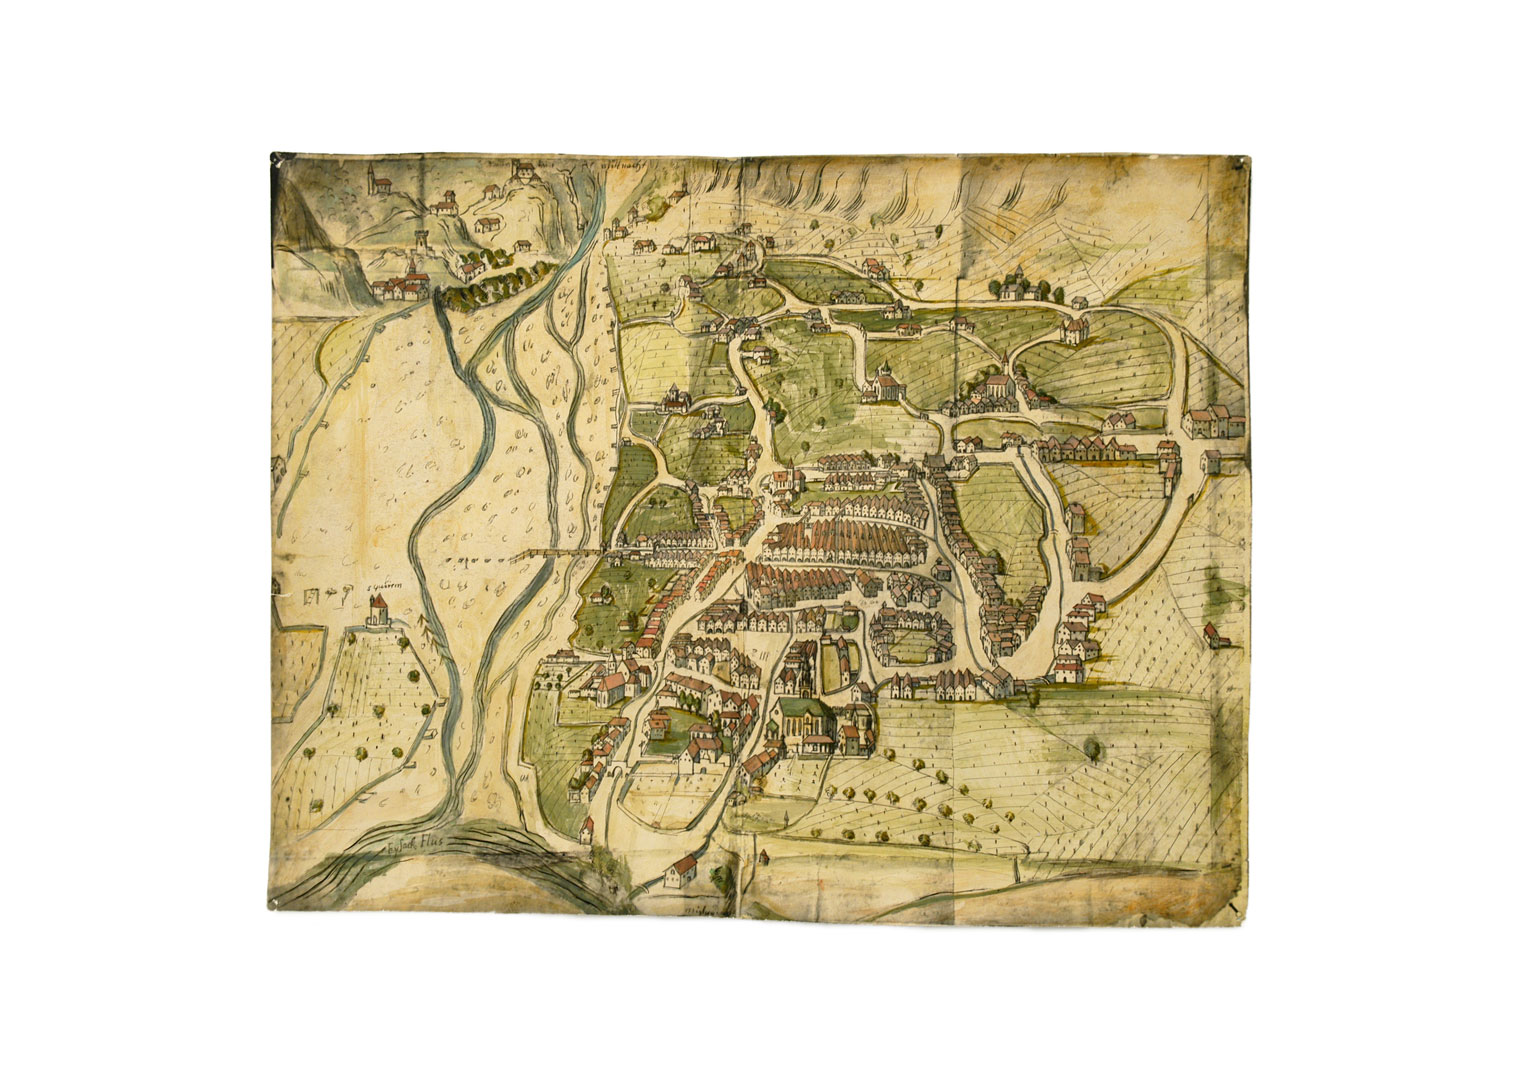 hand drawn medieval map of Bolzano from 1607 https://www.comune.bolzano.it/GalleryDetail.jws?src=26606_Ludwig_Pfendter_1607_Museum_6973_A.jpg